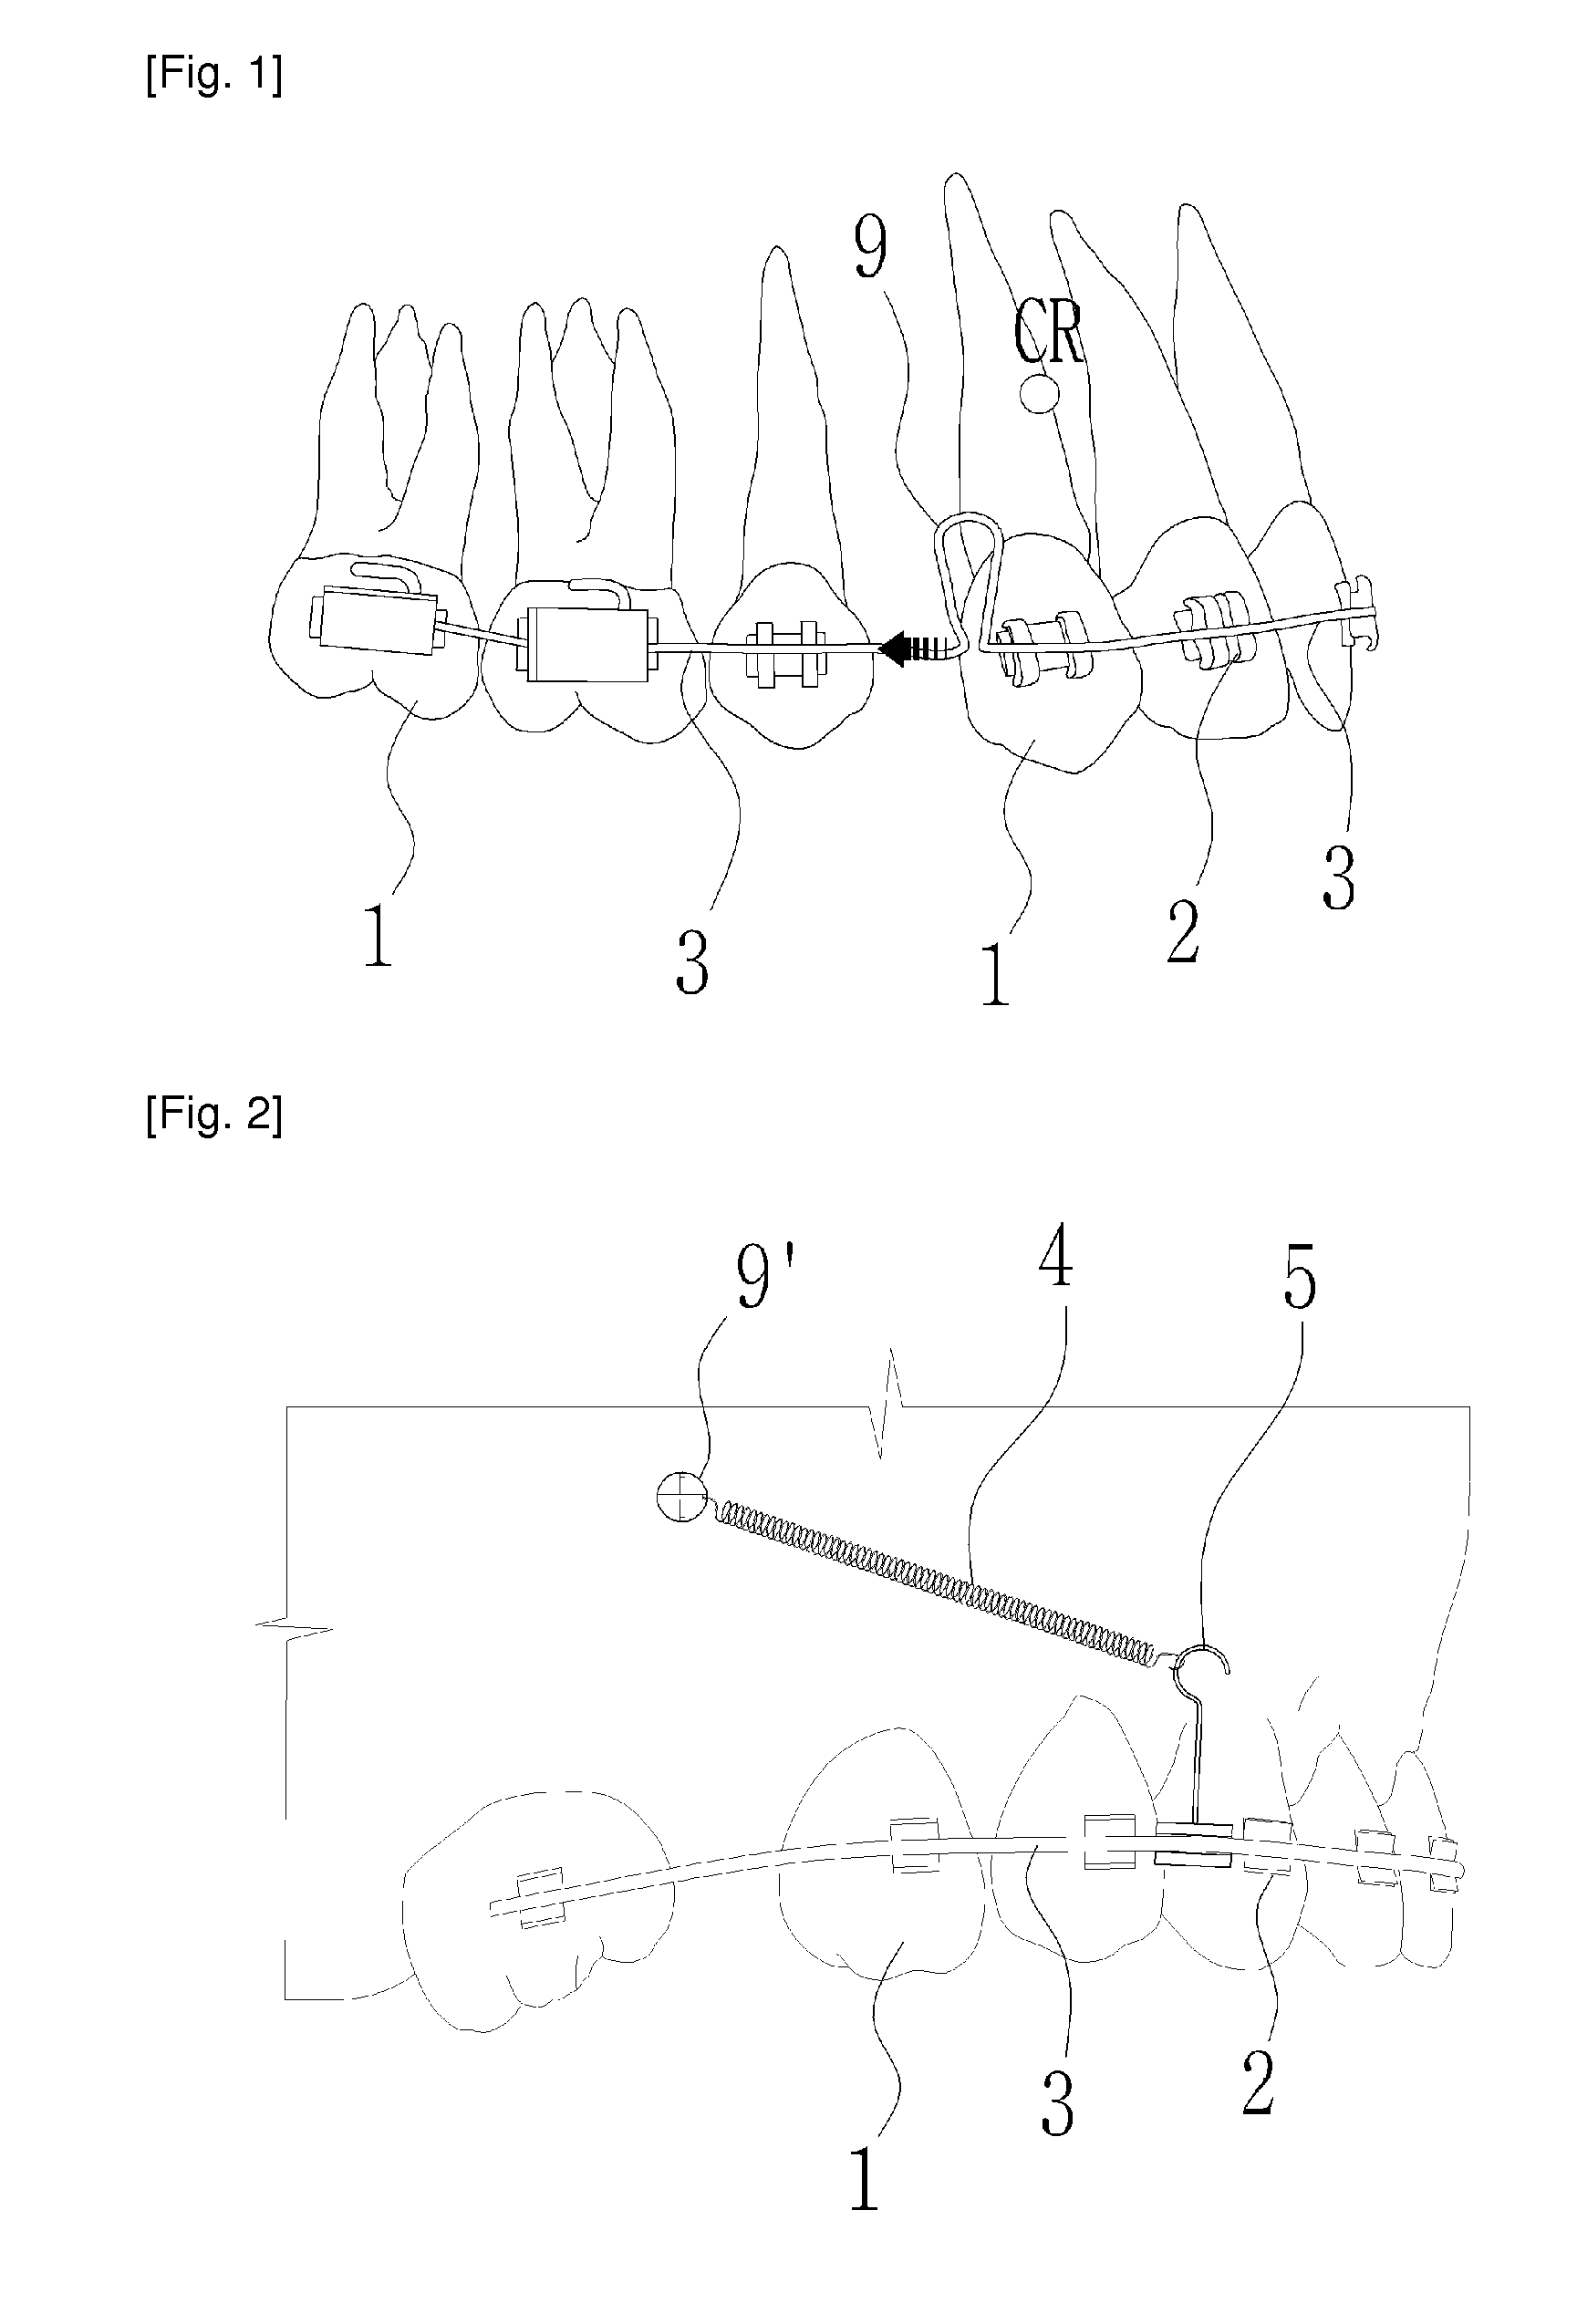 Connection device for surgical operation of straightening irregular teeth